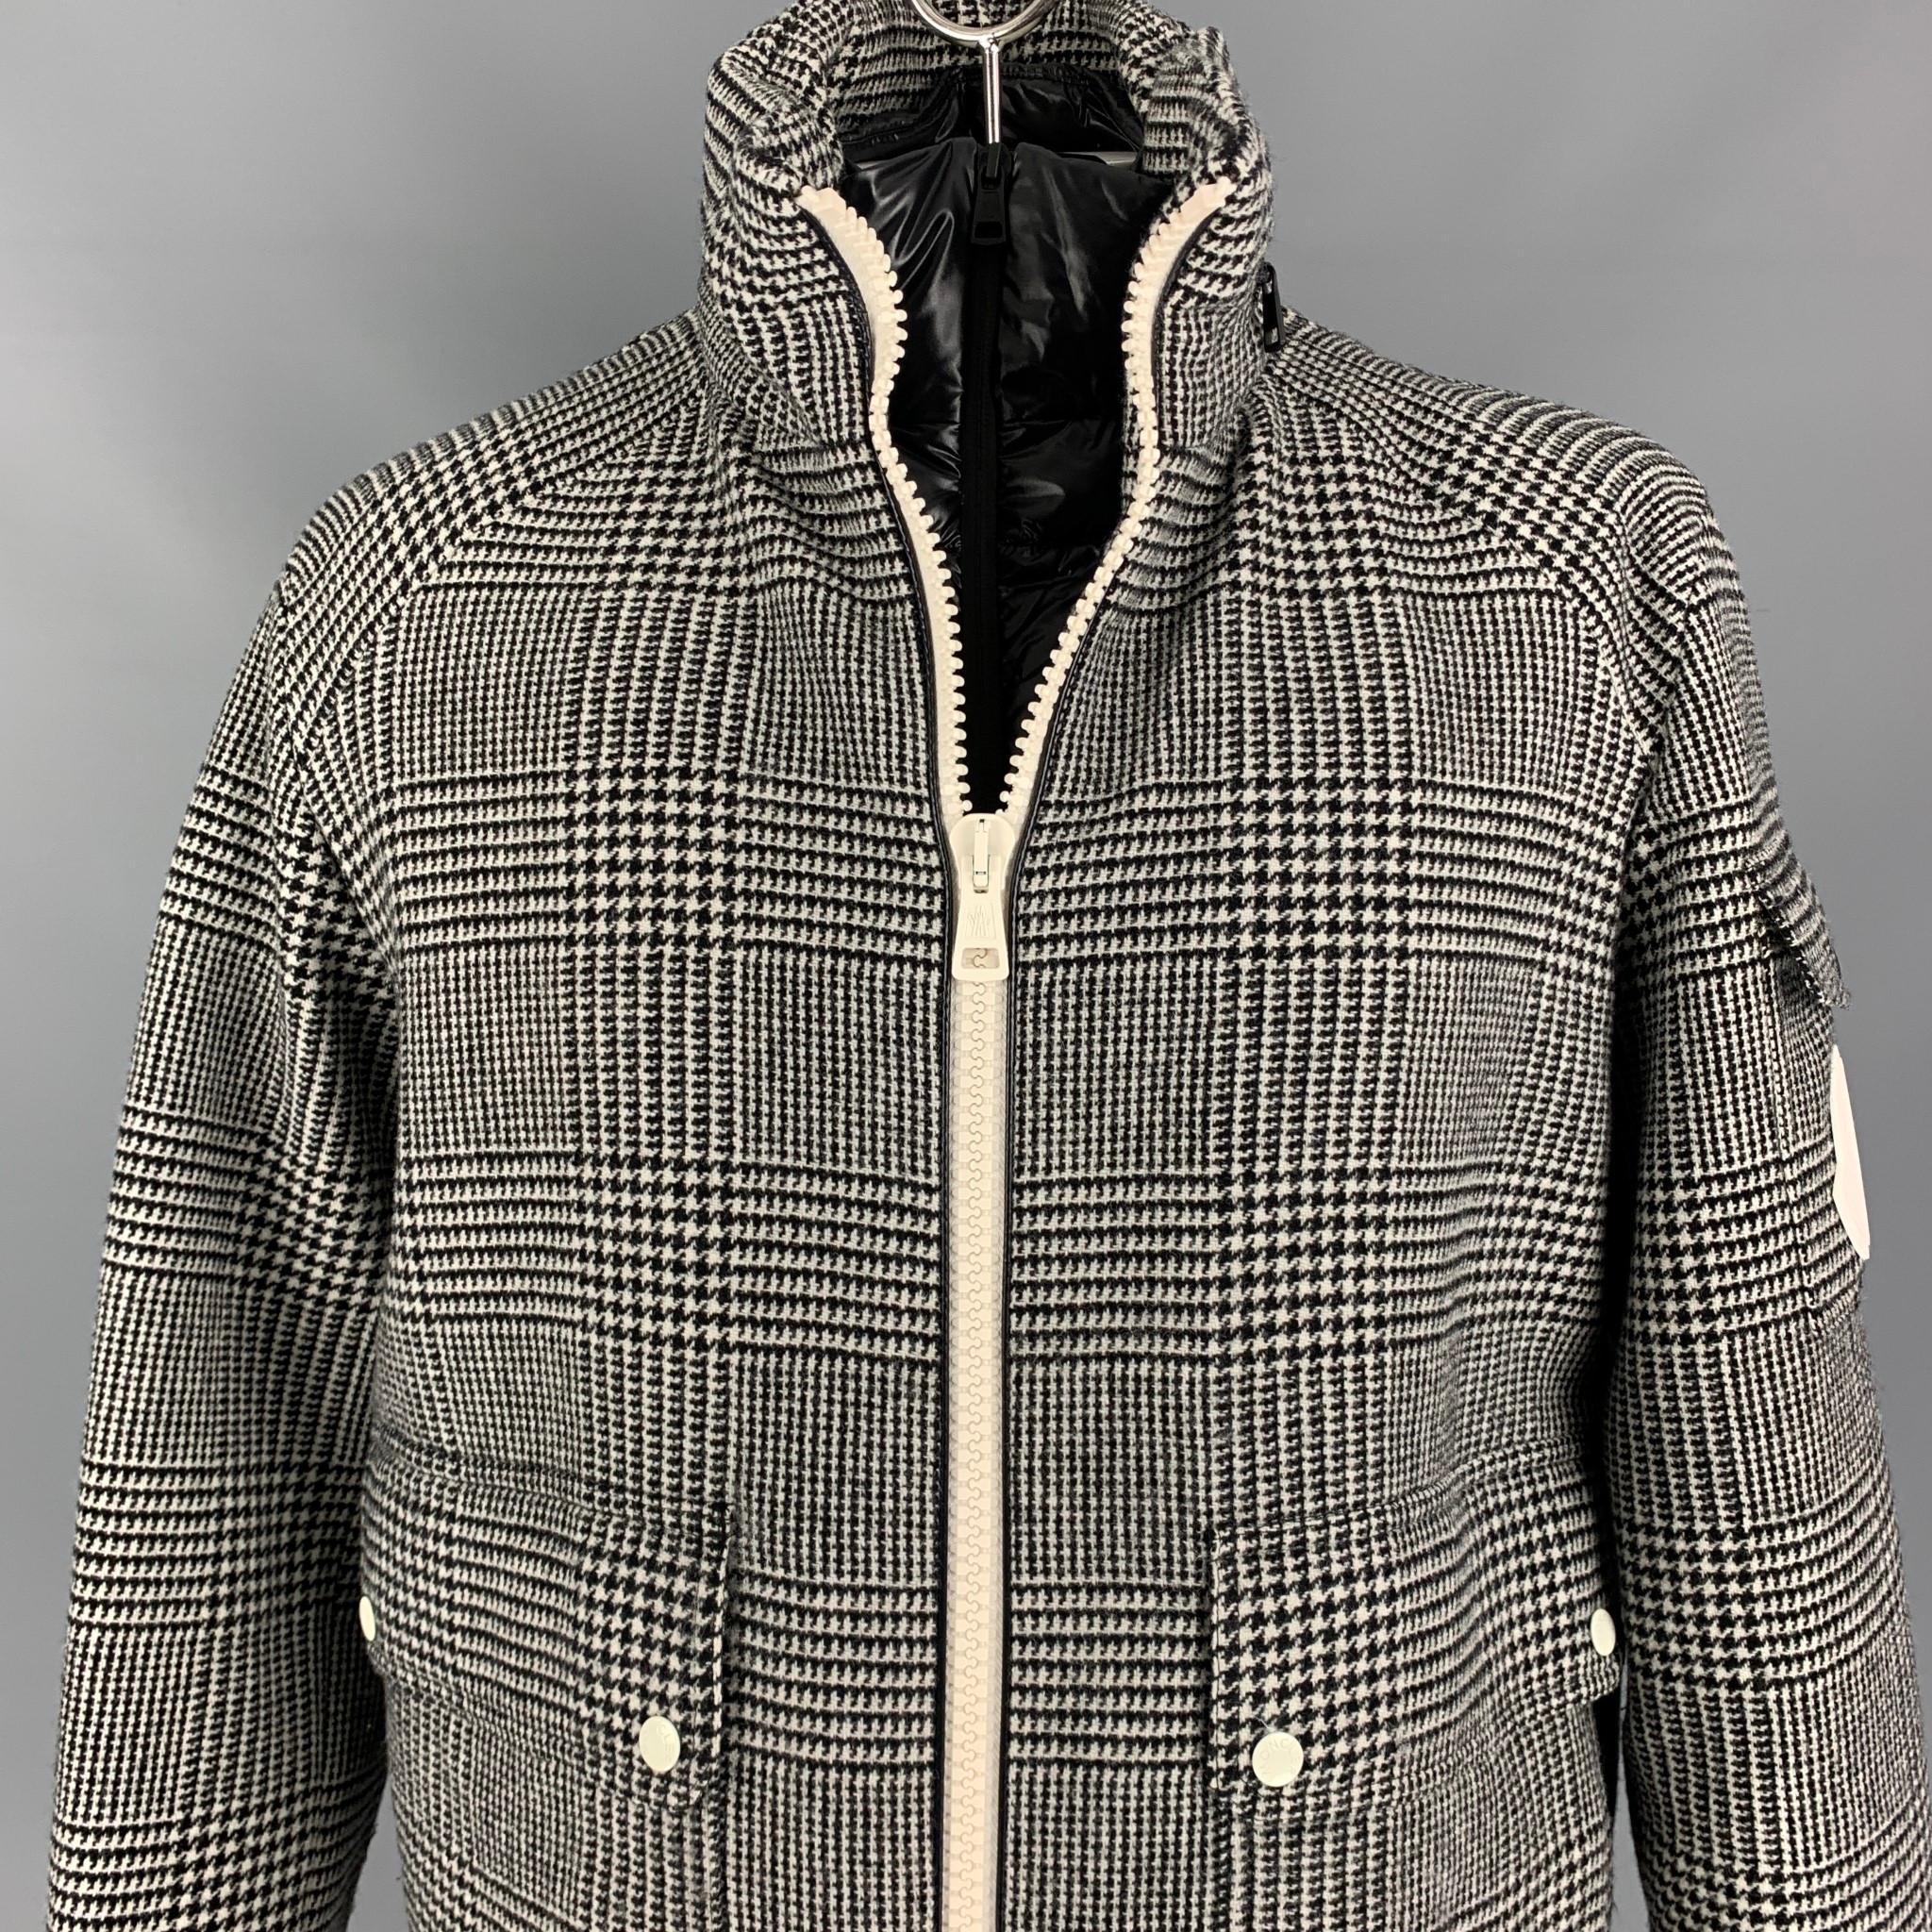 MONCLER jacket comes in a black & white plaid wool with a down fill quilted liner featuring a hidden hood design, high collar, flap pockets, ribbed hem, inner layer, and a full zip up closure. Made in Romania. 

Excellent Pre-Owned